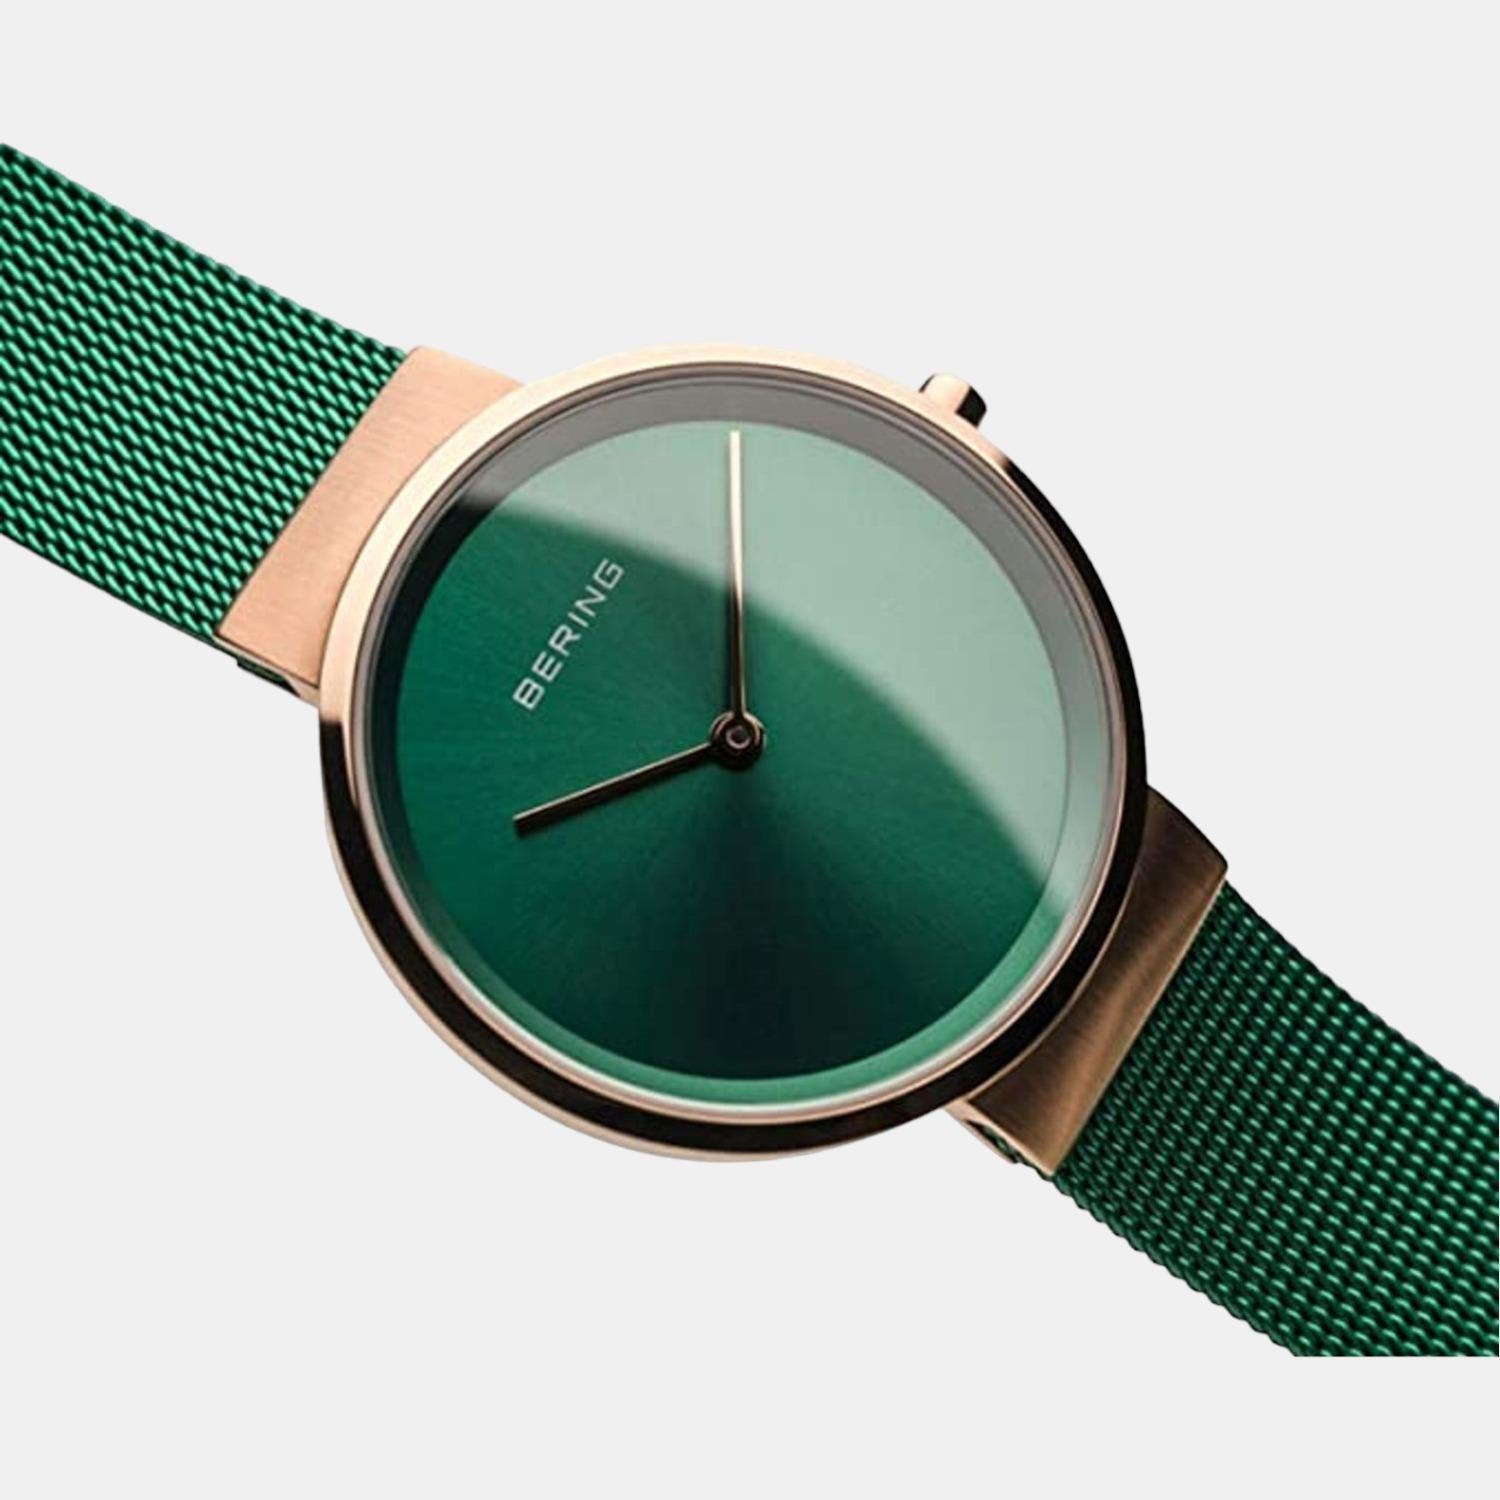 Shop BERING Quartz Watches Analog Watches by nopple | BUYMA